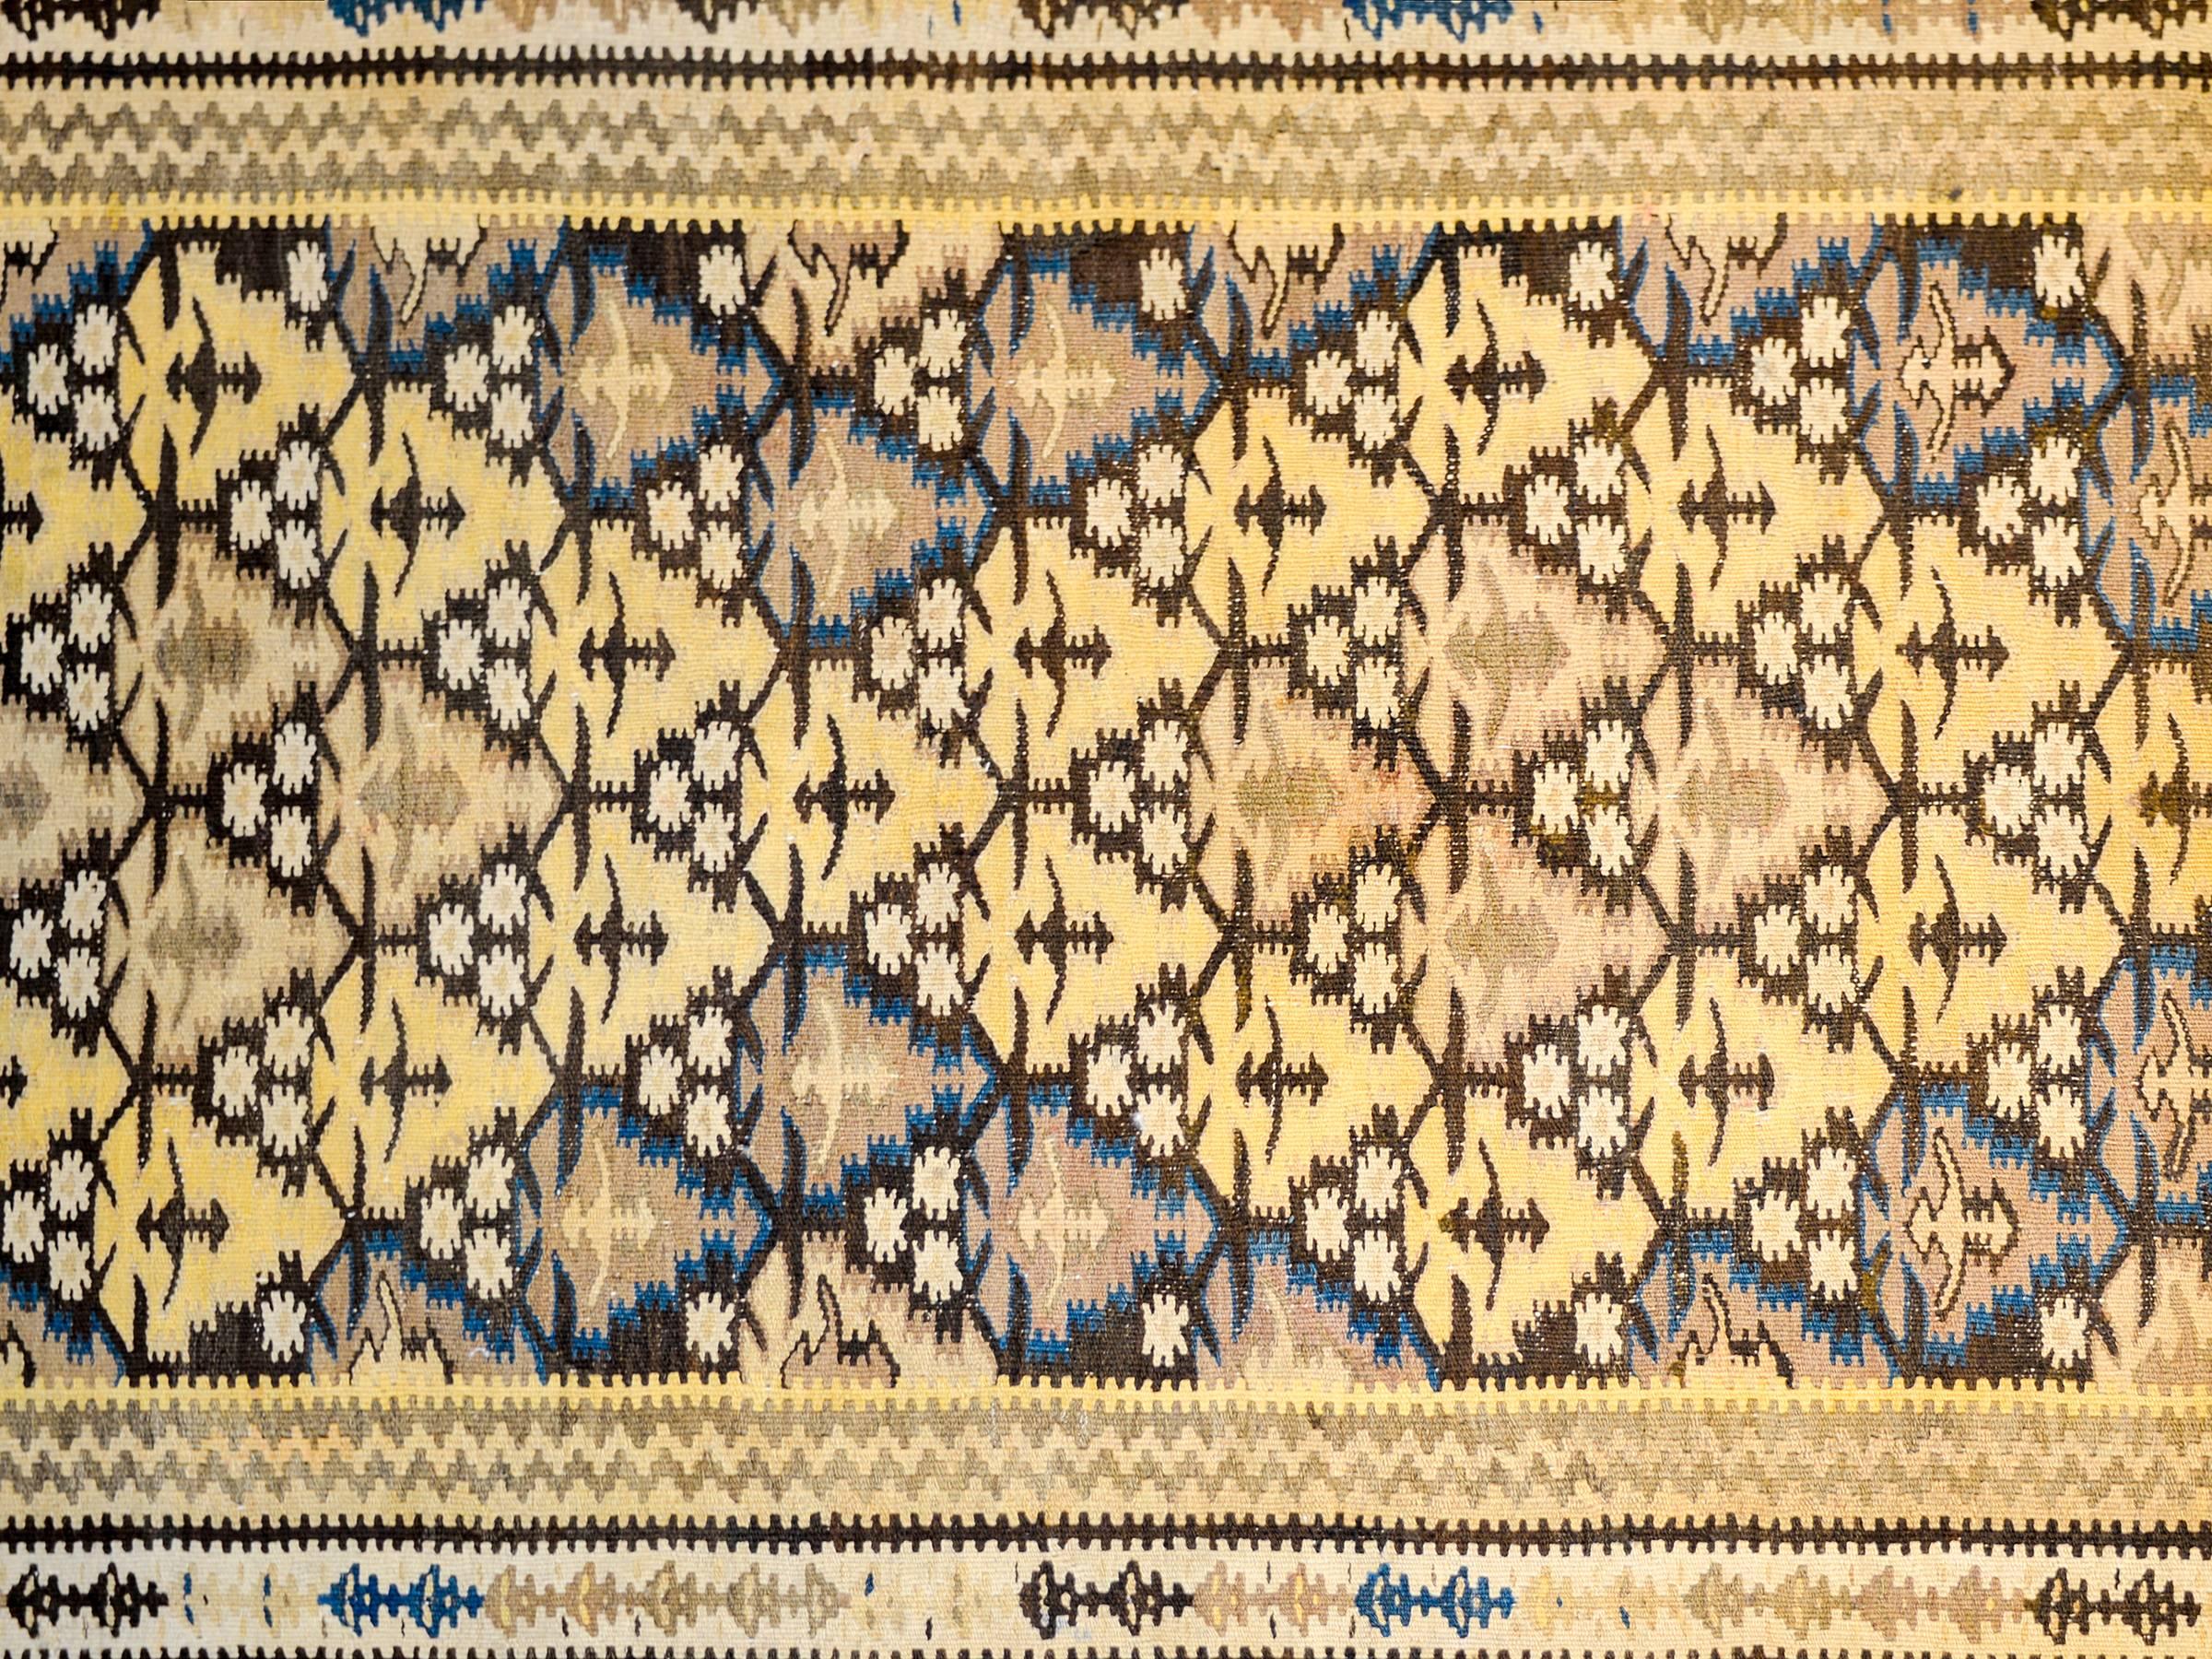 An amazing mid-20th century Persian Qazvin Kilim runner with an all-over tree-of-life pattern woven in a way that creates a diamond pattern of gold, indigo, and natural wool colored trees. The border is complex, with three distinct floral and